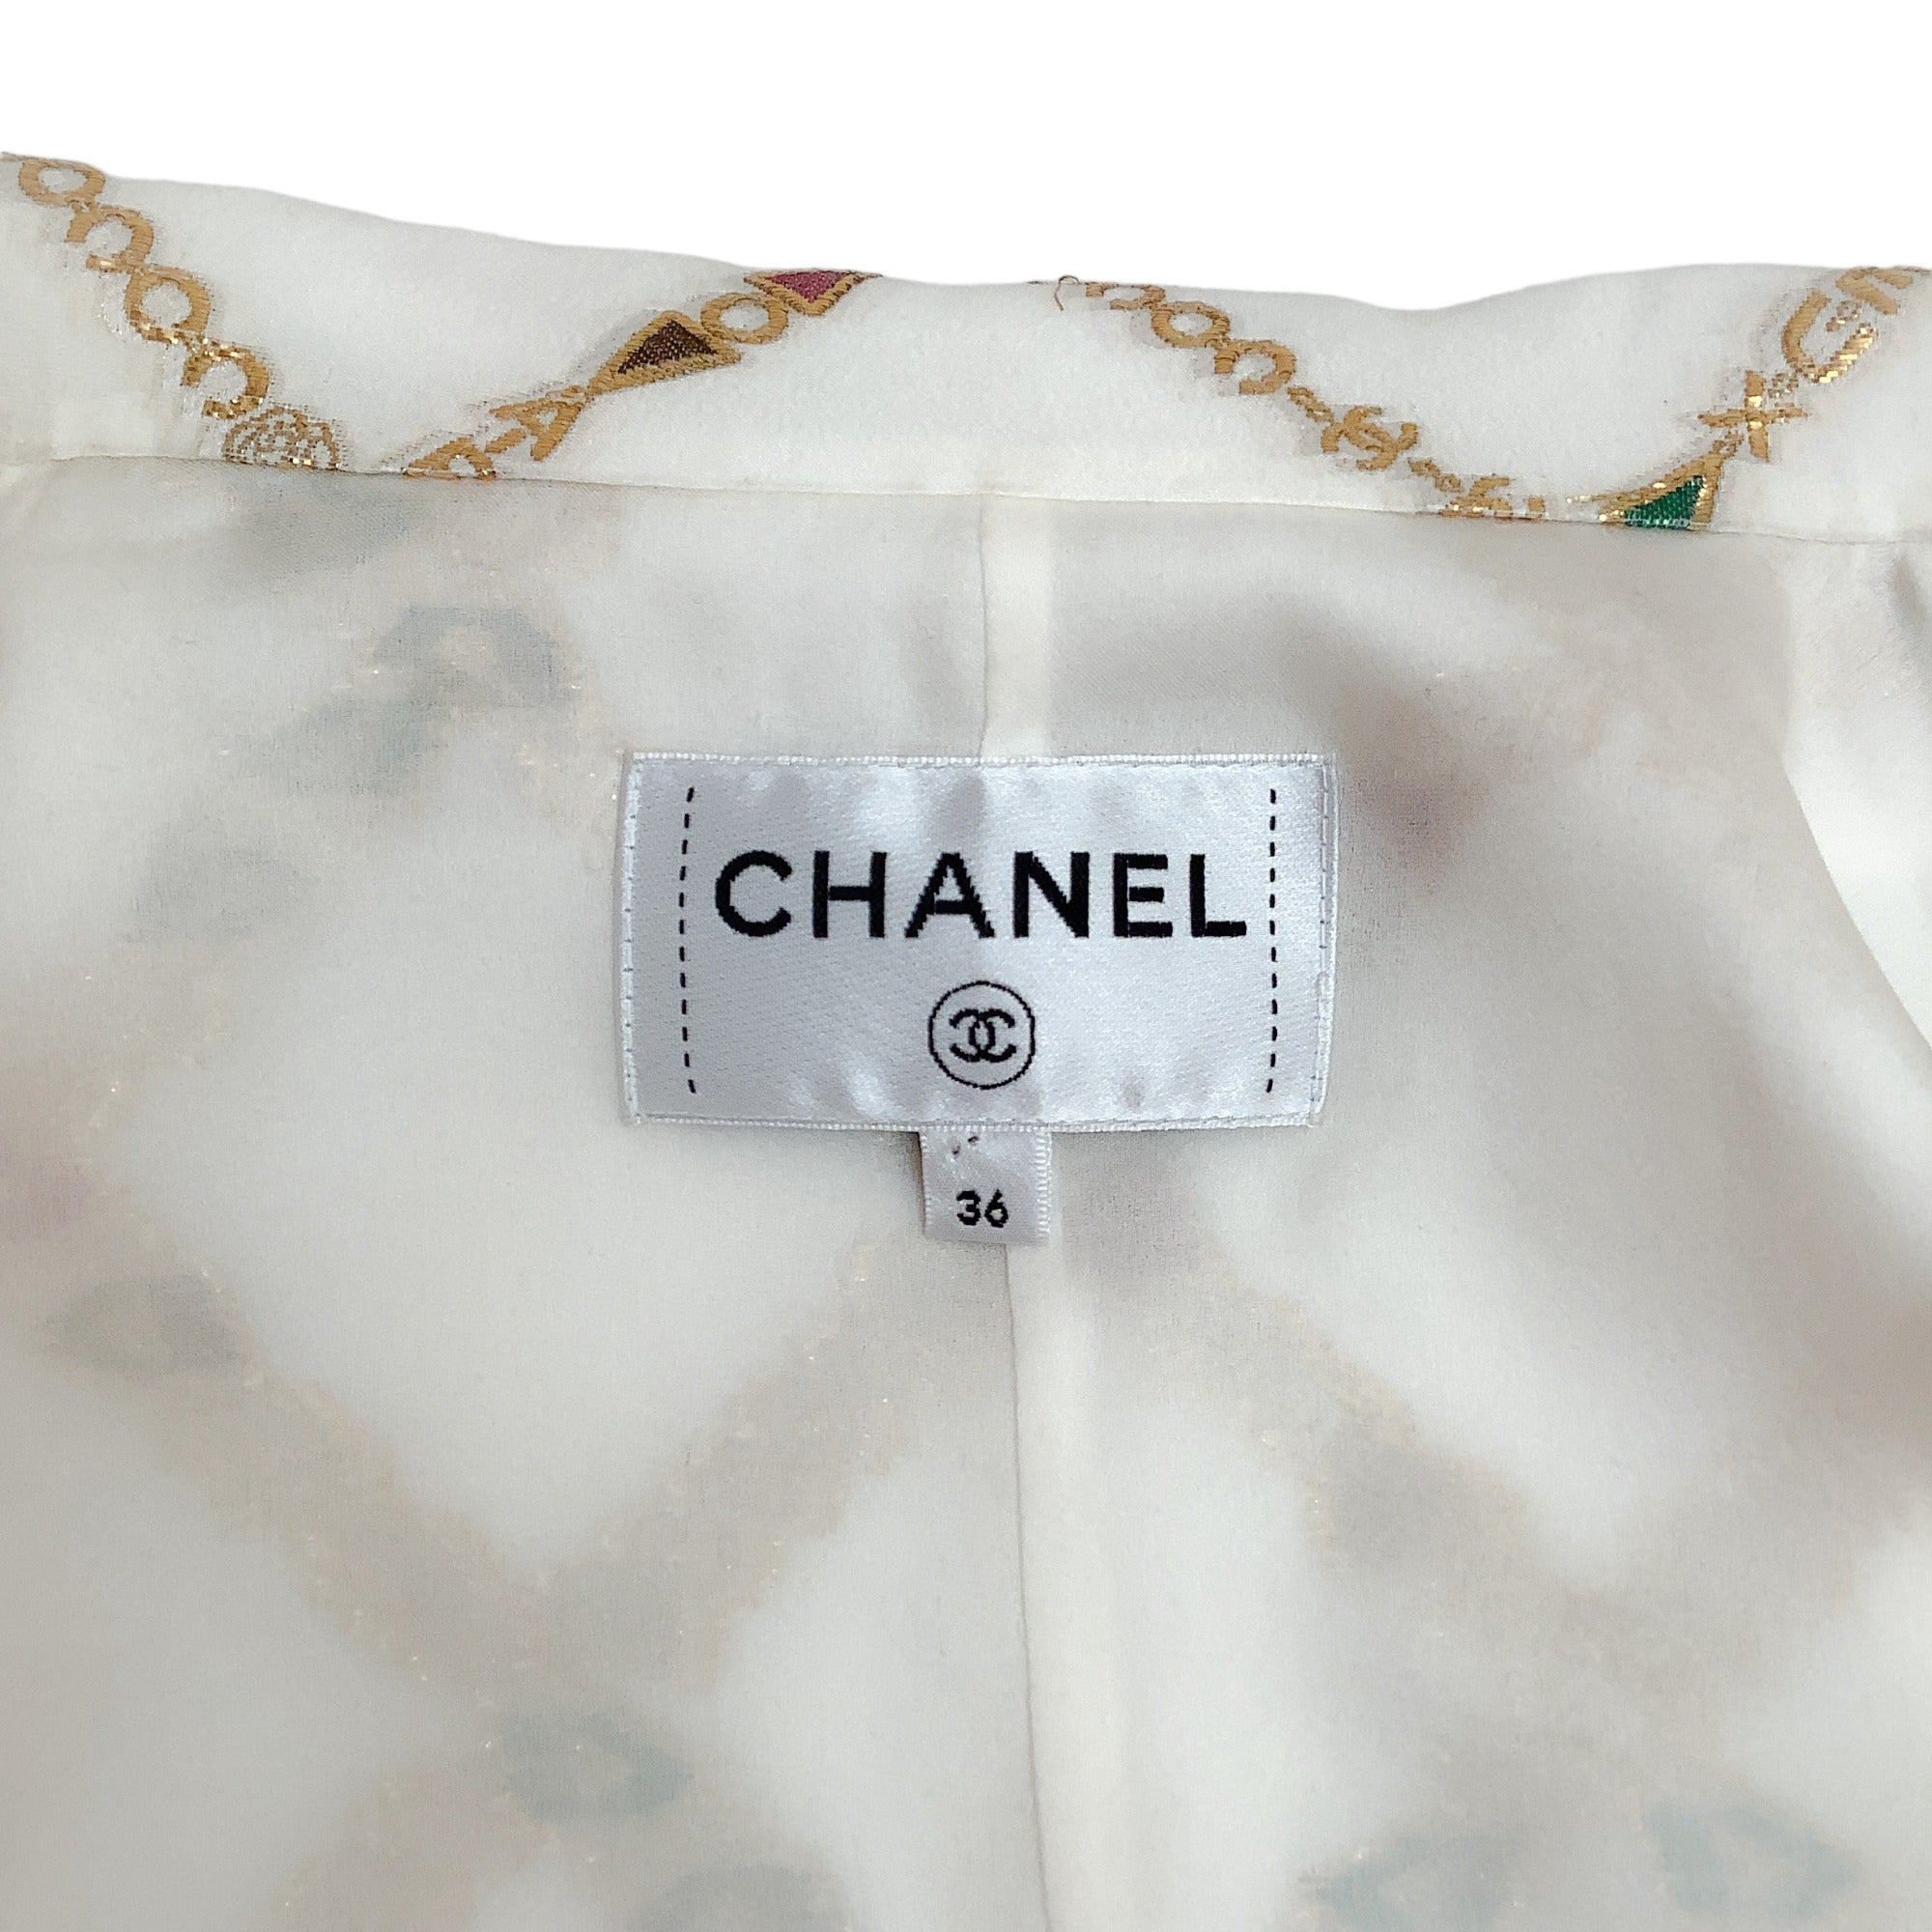 Chanel Ivory Low Cut Blouse with Gold Lurex Embroidery